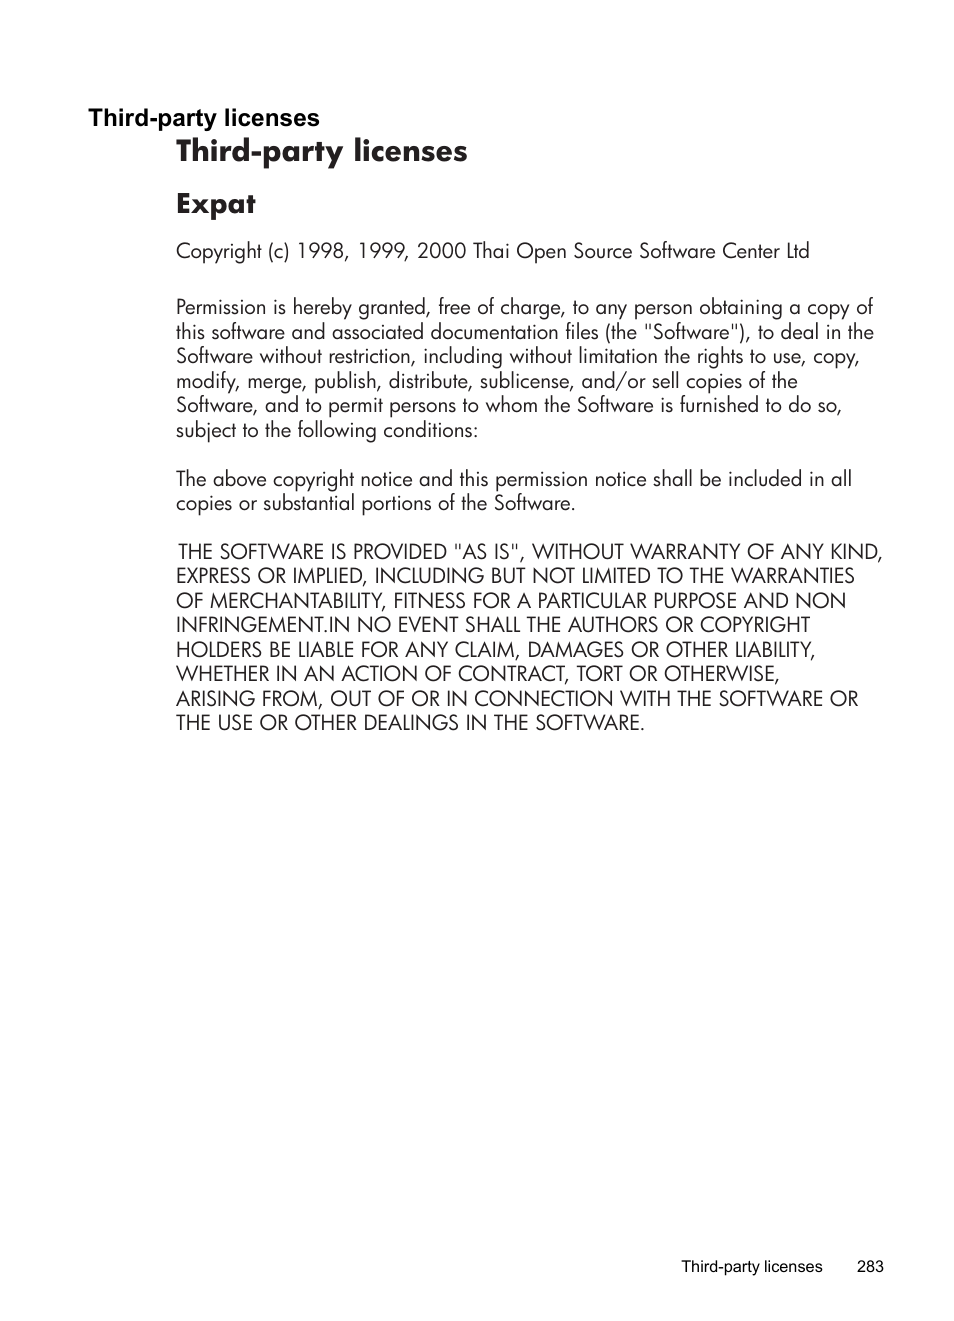 Third-party licenses, Expat | HP Officejet Pro 8500 User Manual | Page 287 / 306